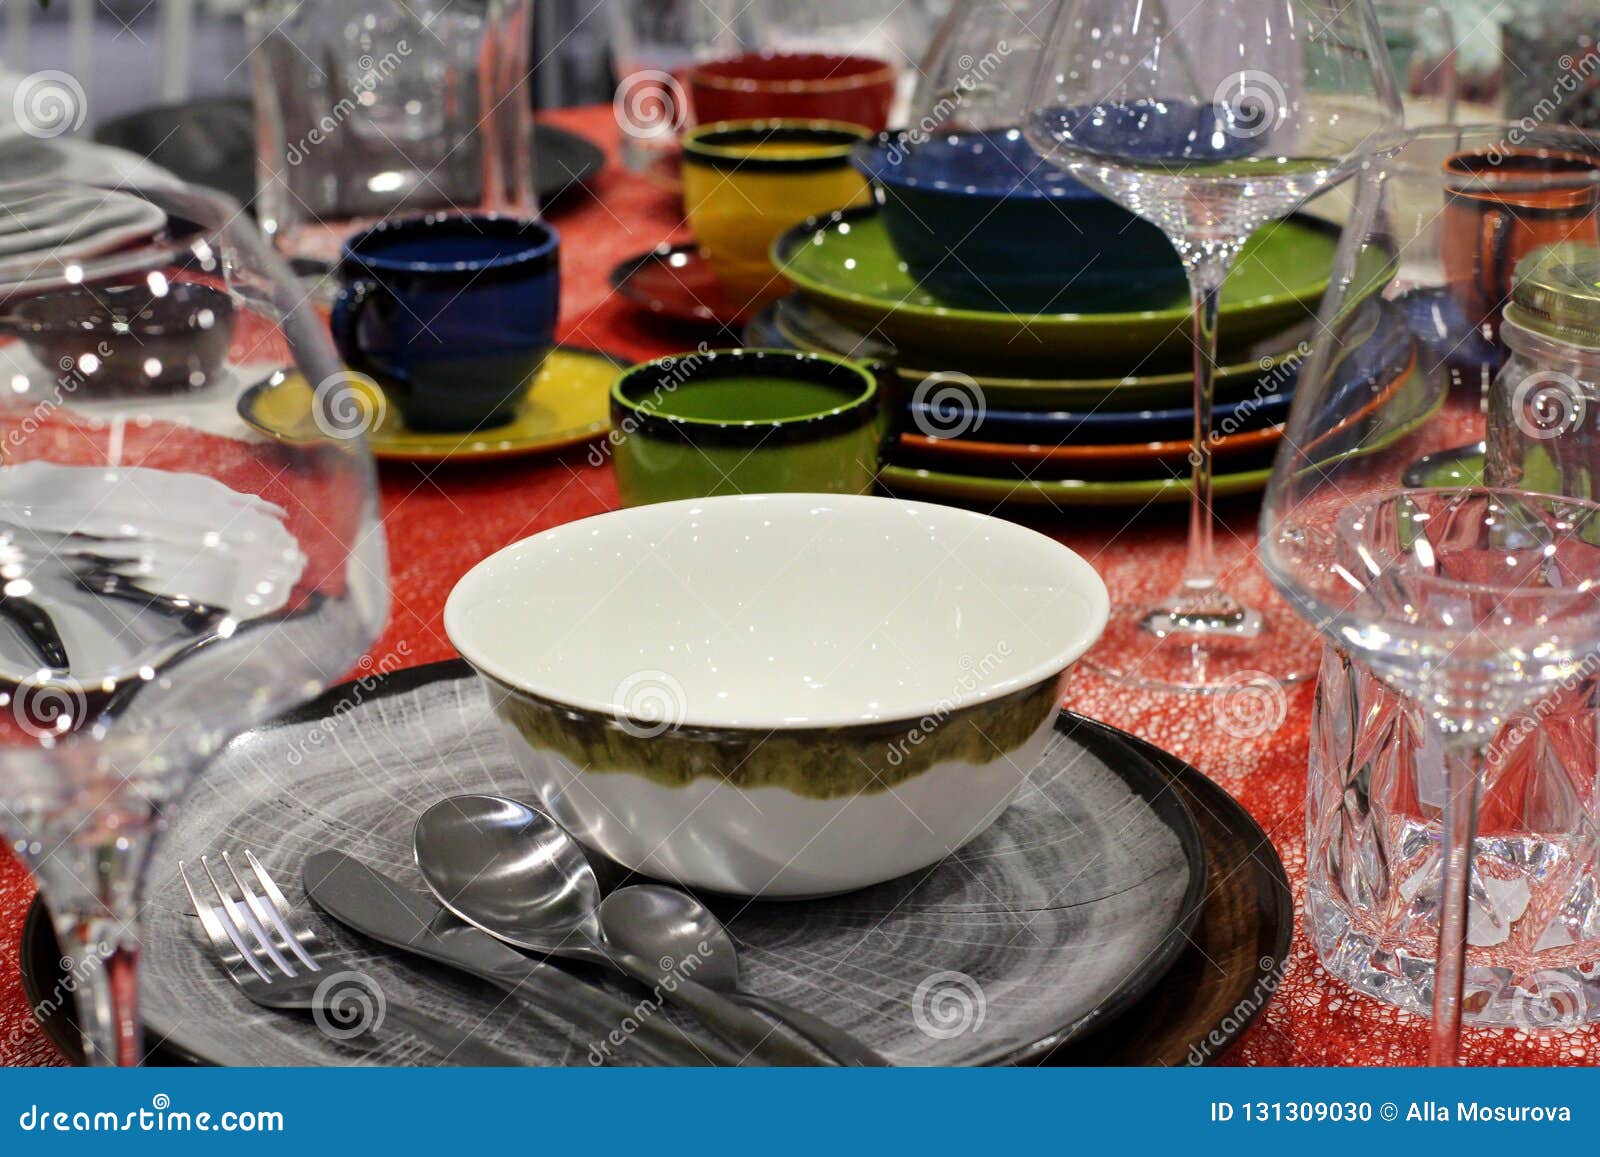 Set of Bright Beautiful Dishes and Glasses on the Table Stock Photo ...